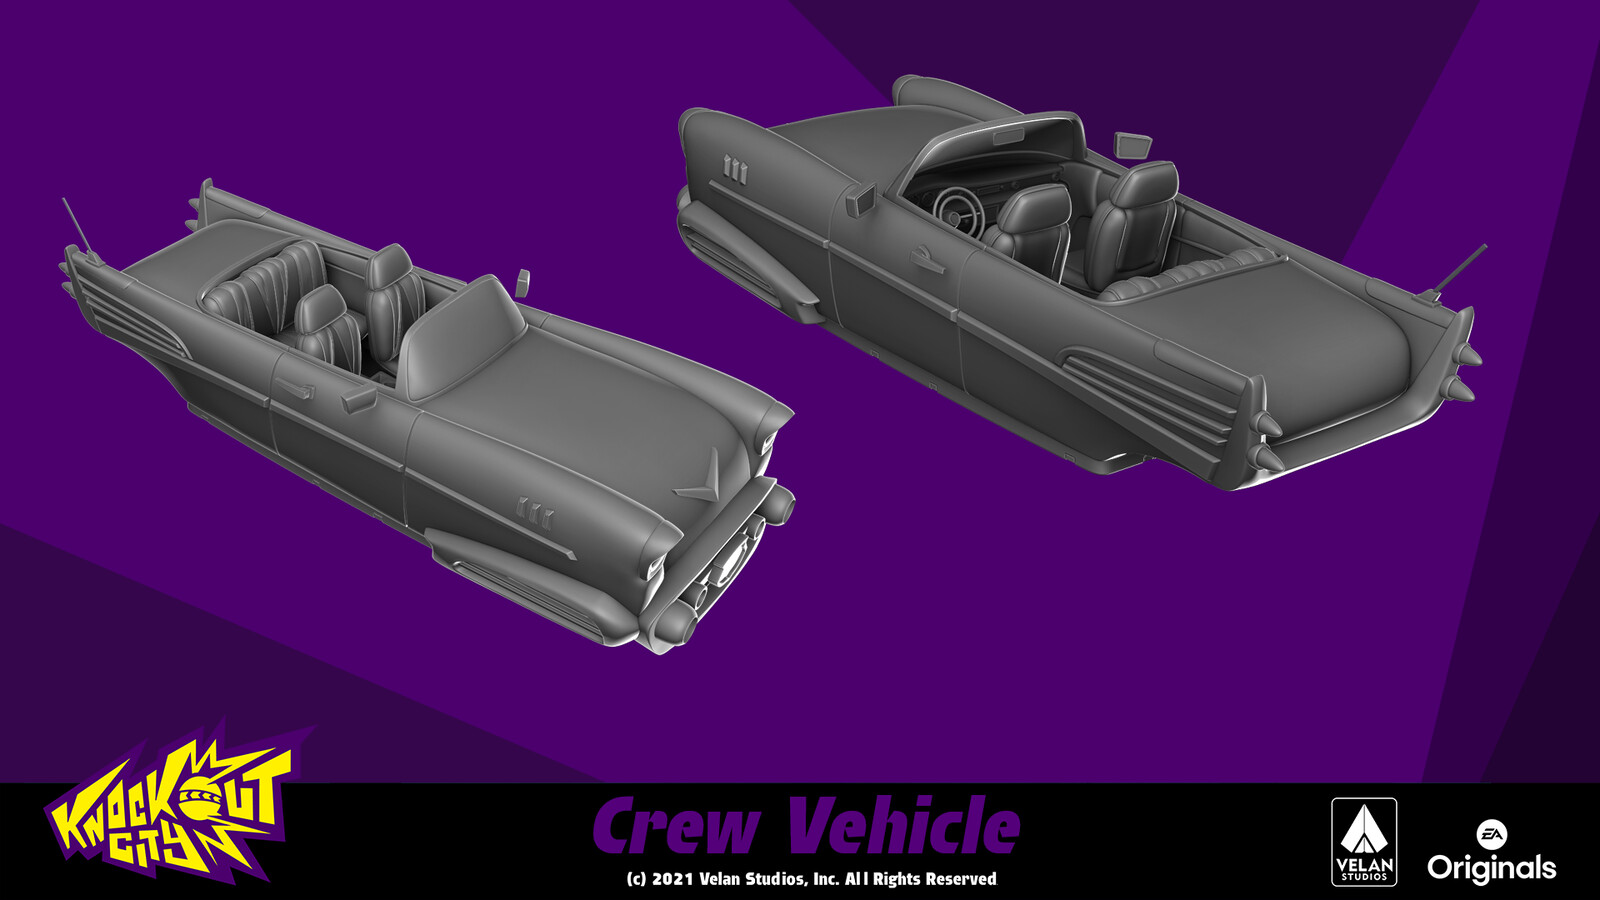 Base crew vehicle that all other convertible's are built from. 
zbrush and maya